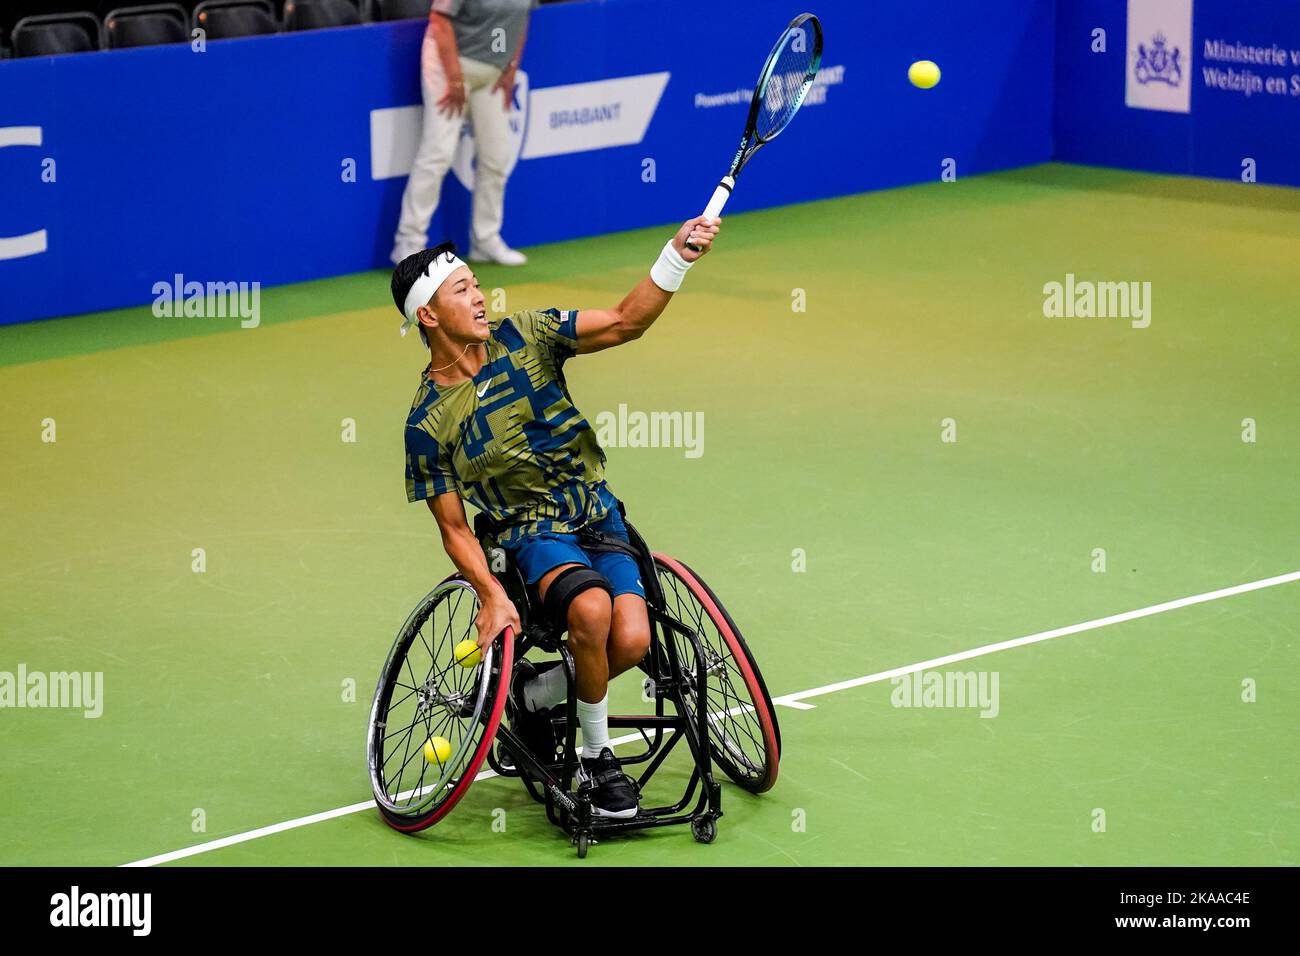 OSS, NETHERLANDS - NOVEMBER 1: Tokito Oda of Japan plays a forehand in his match against Alfie Hewett of Great Britain during Day 3 of the 2022 ITF Wheelchair Tennis Masters at Sportcentrum de Rusheuvel on November 1, 2022 in Oss, Netherlands (Photo by Rene Nijhuis/Orange Pictures) Stock Photo